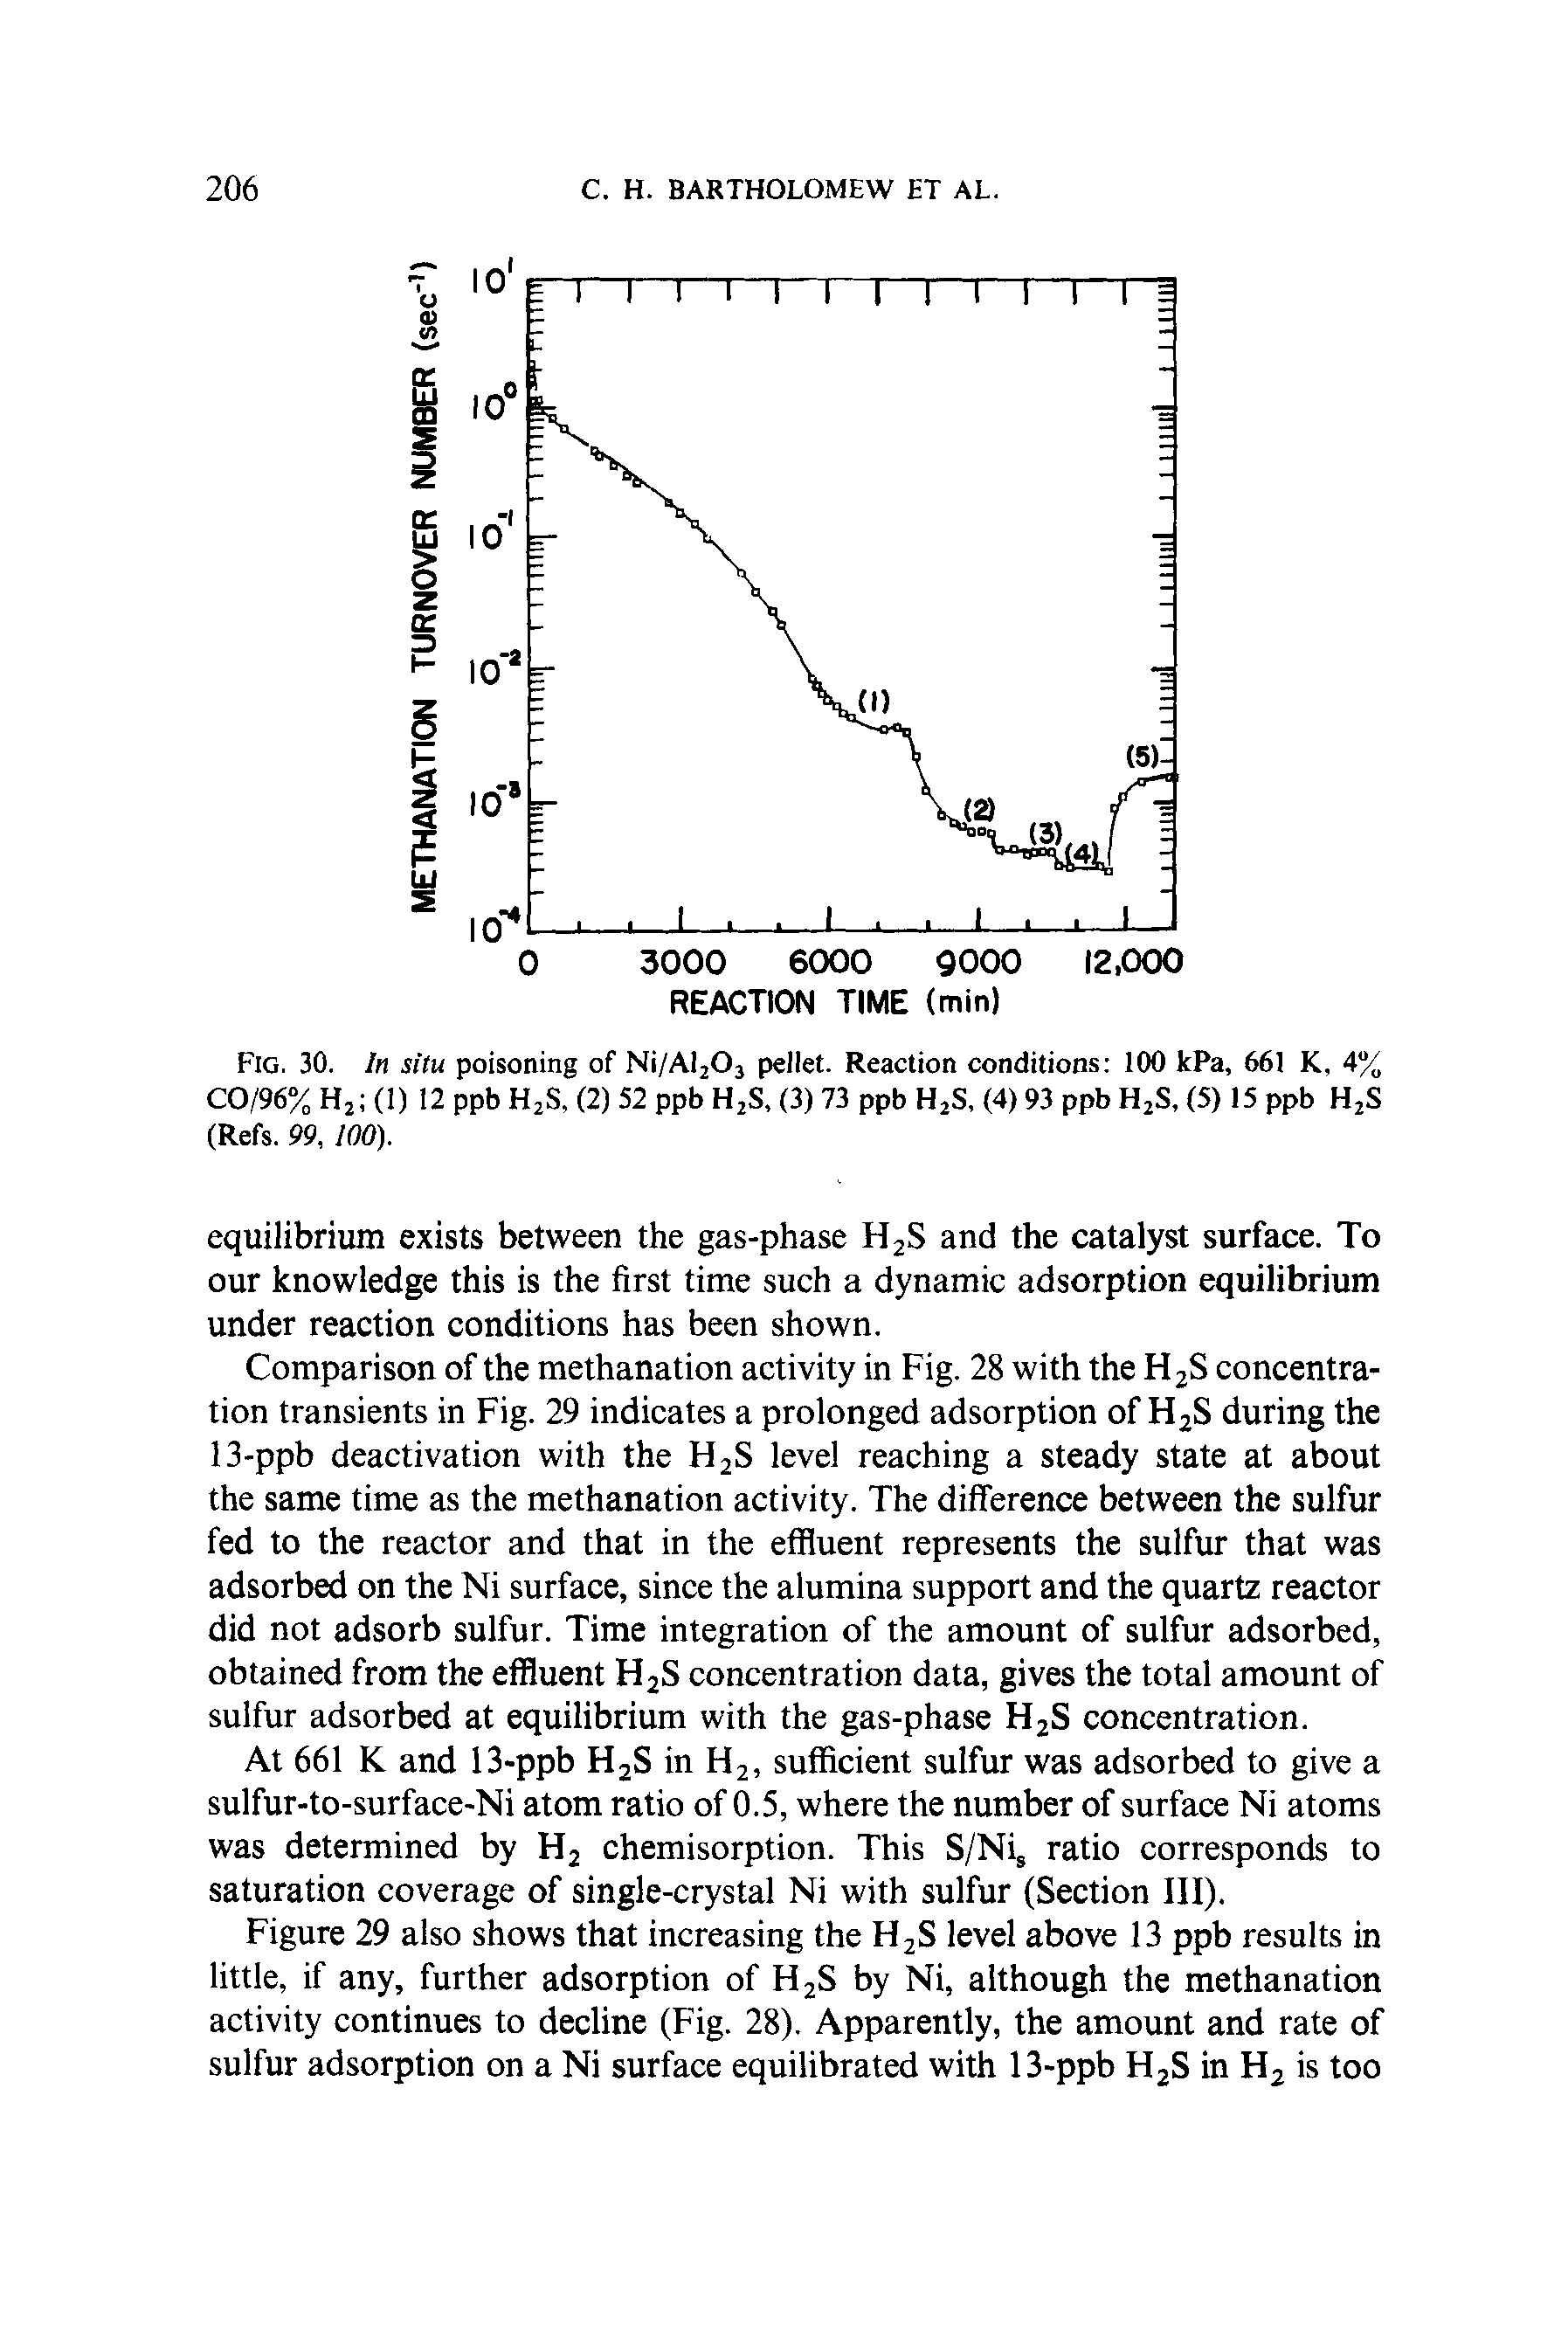 Figure 29 also shows that increasing the H2S level above 13 ppb results in little, if any, further adsorption of H2S by Ni, although the methanation activity continues to decline (Fig. 28). Apparently, the amount and rate of sulfur adsorption on a Ni surface equilibrated with 13-ppb H2S in H2 is too...